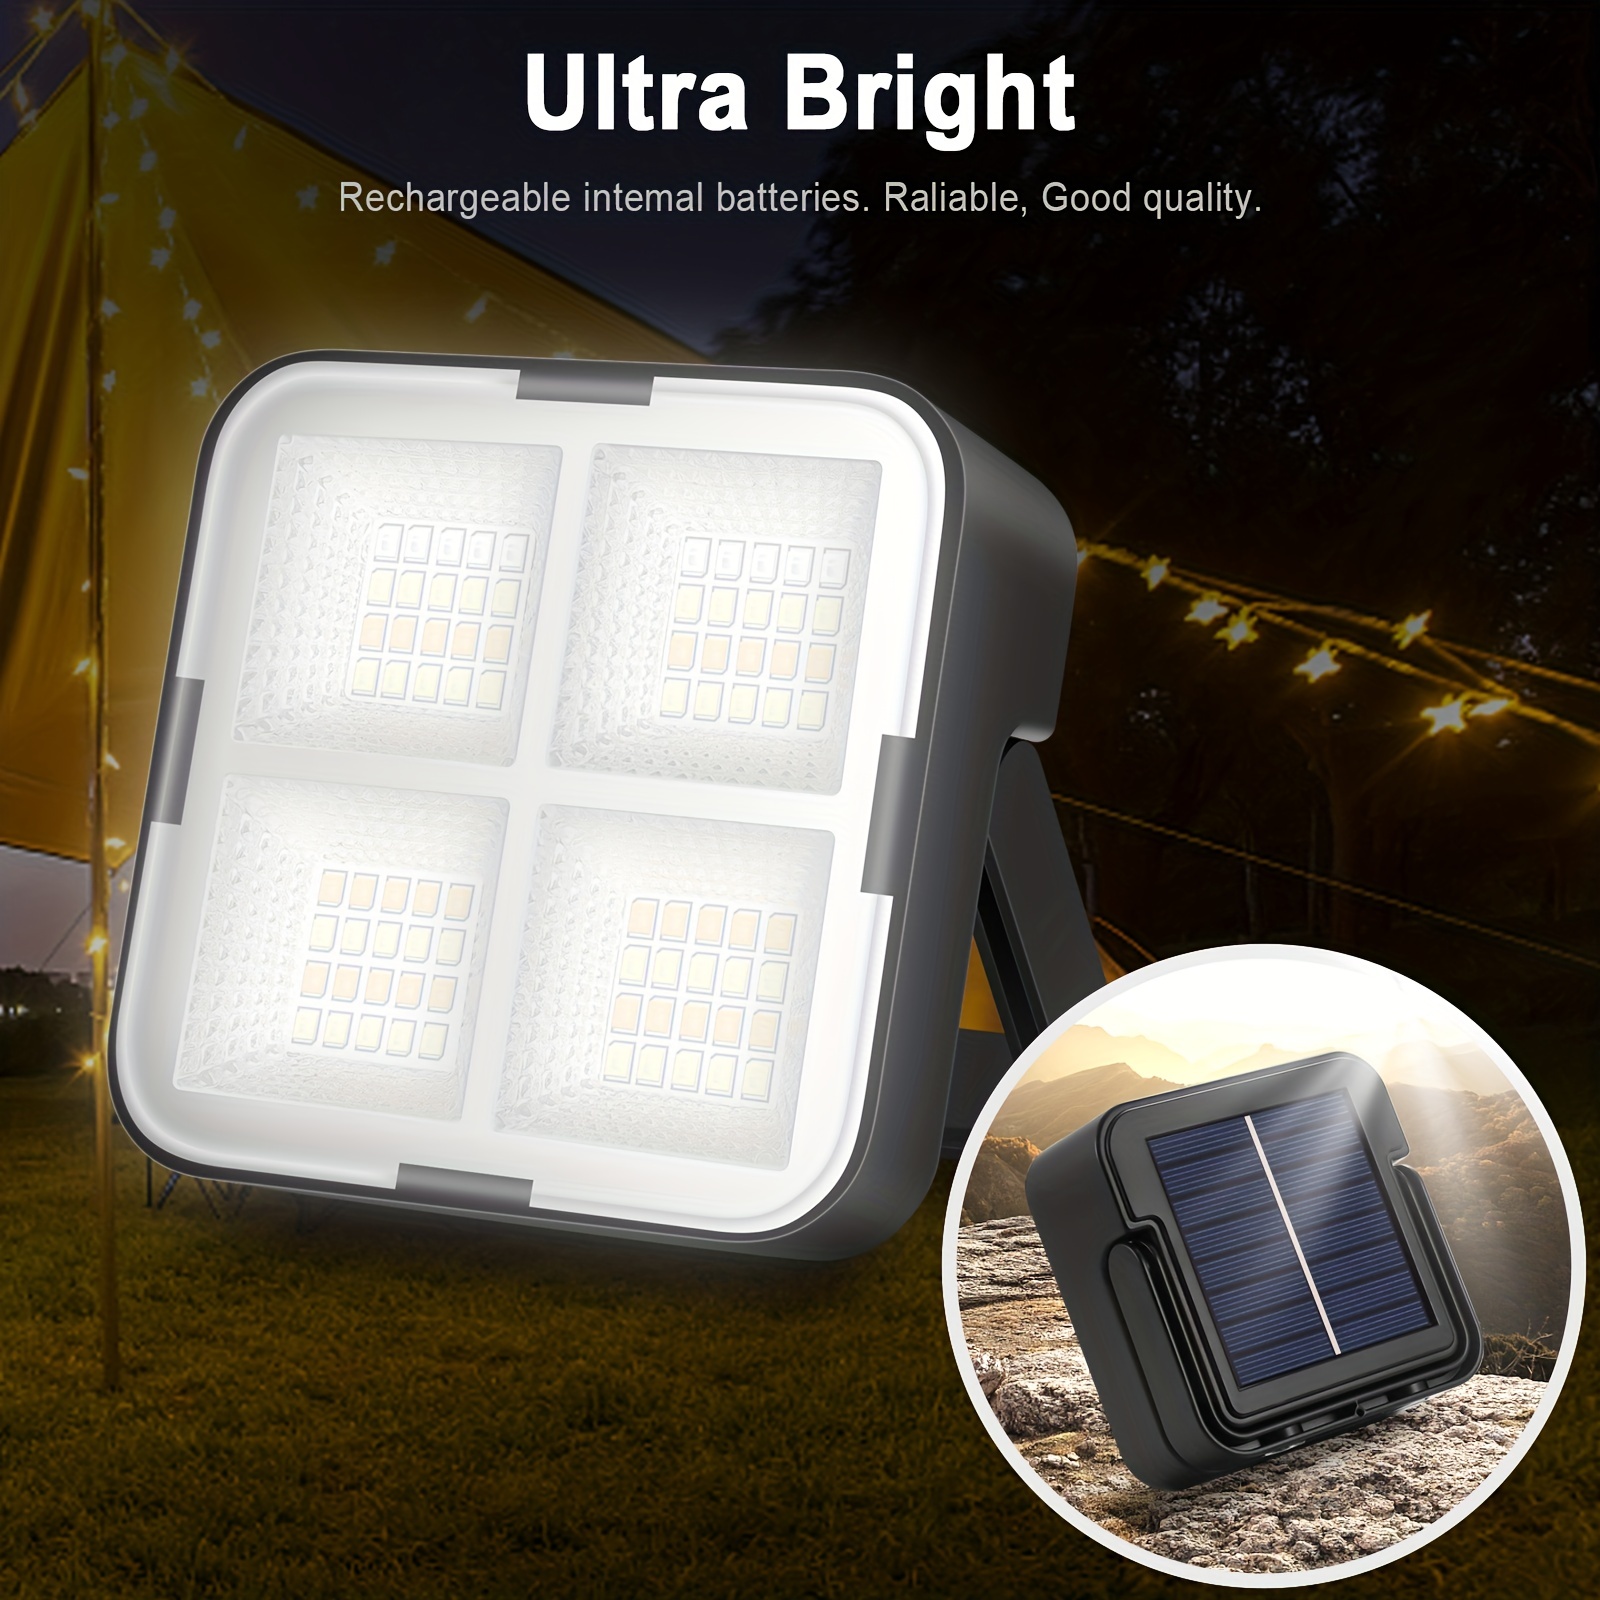 

Brighten Up Your Camping Trip: 1pc Portable Magnetic Suction Solar Light, Usb Rechargeable Tent Lights For Fishing, Outage & Emergency Lighting